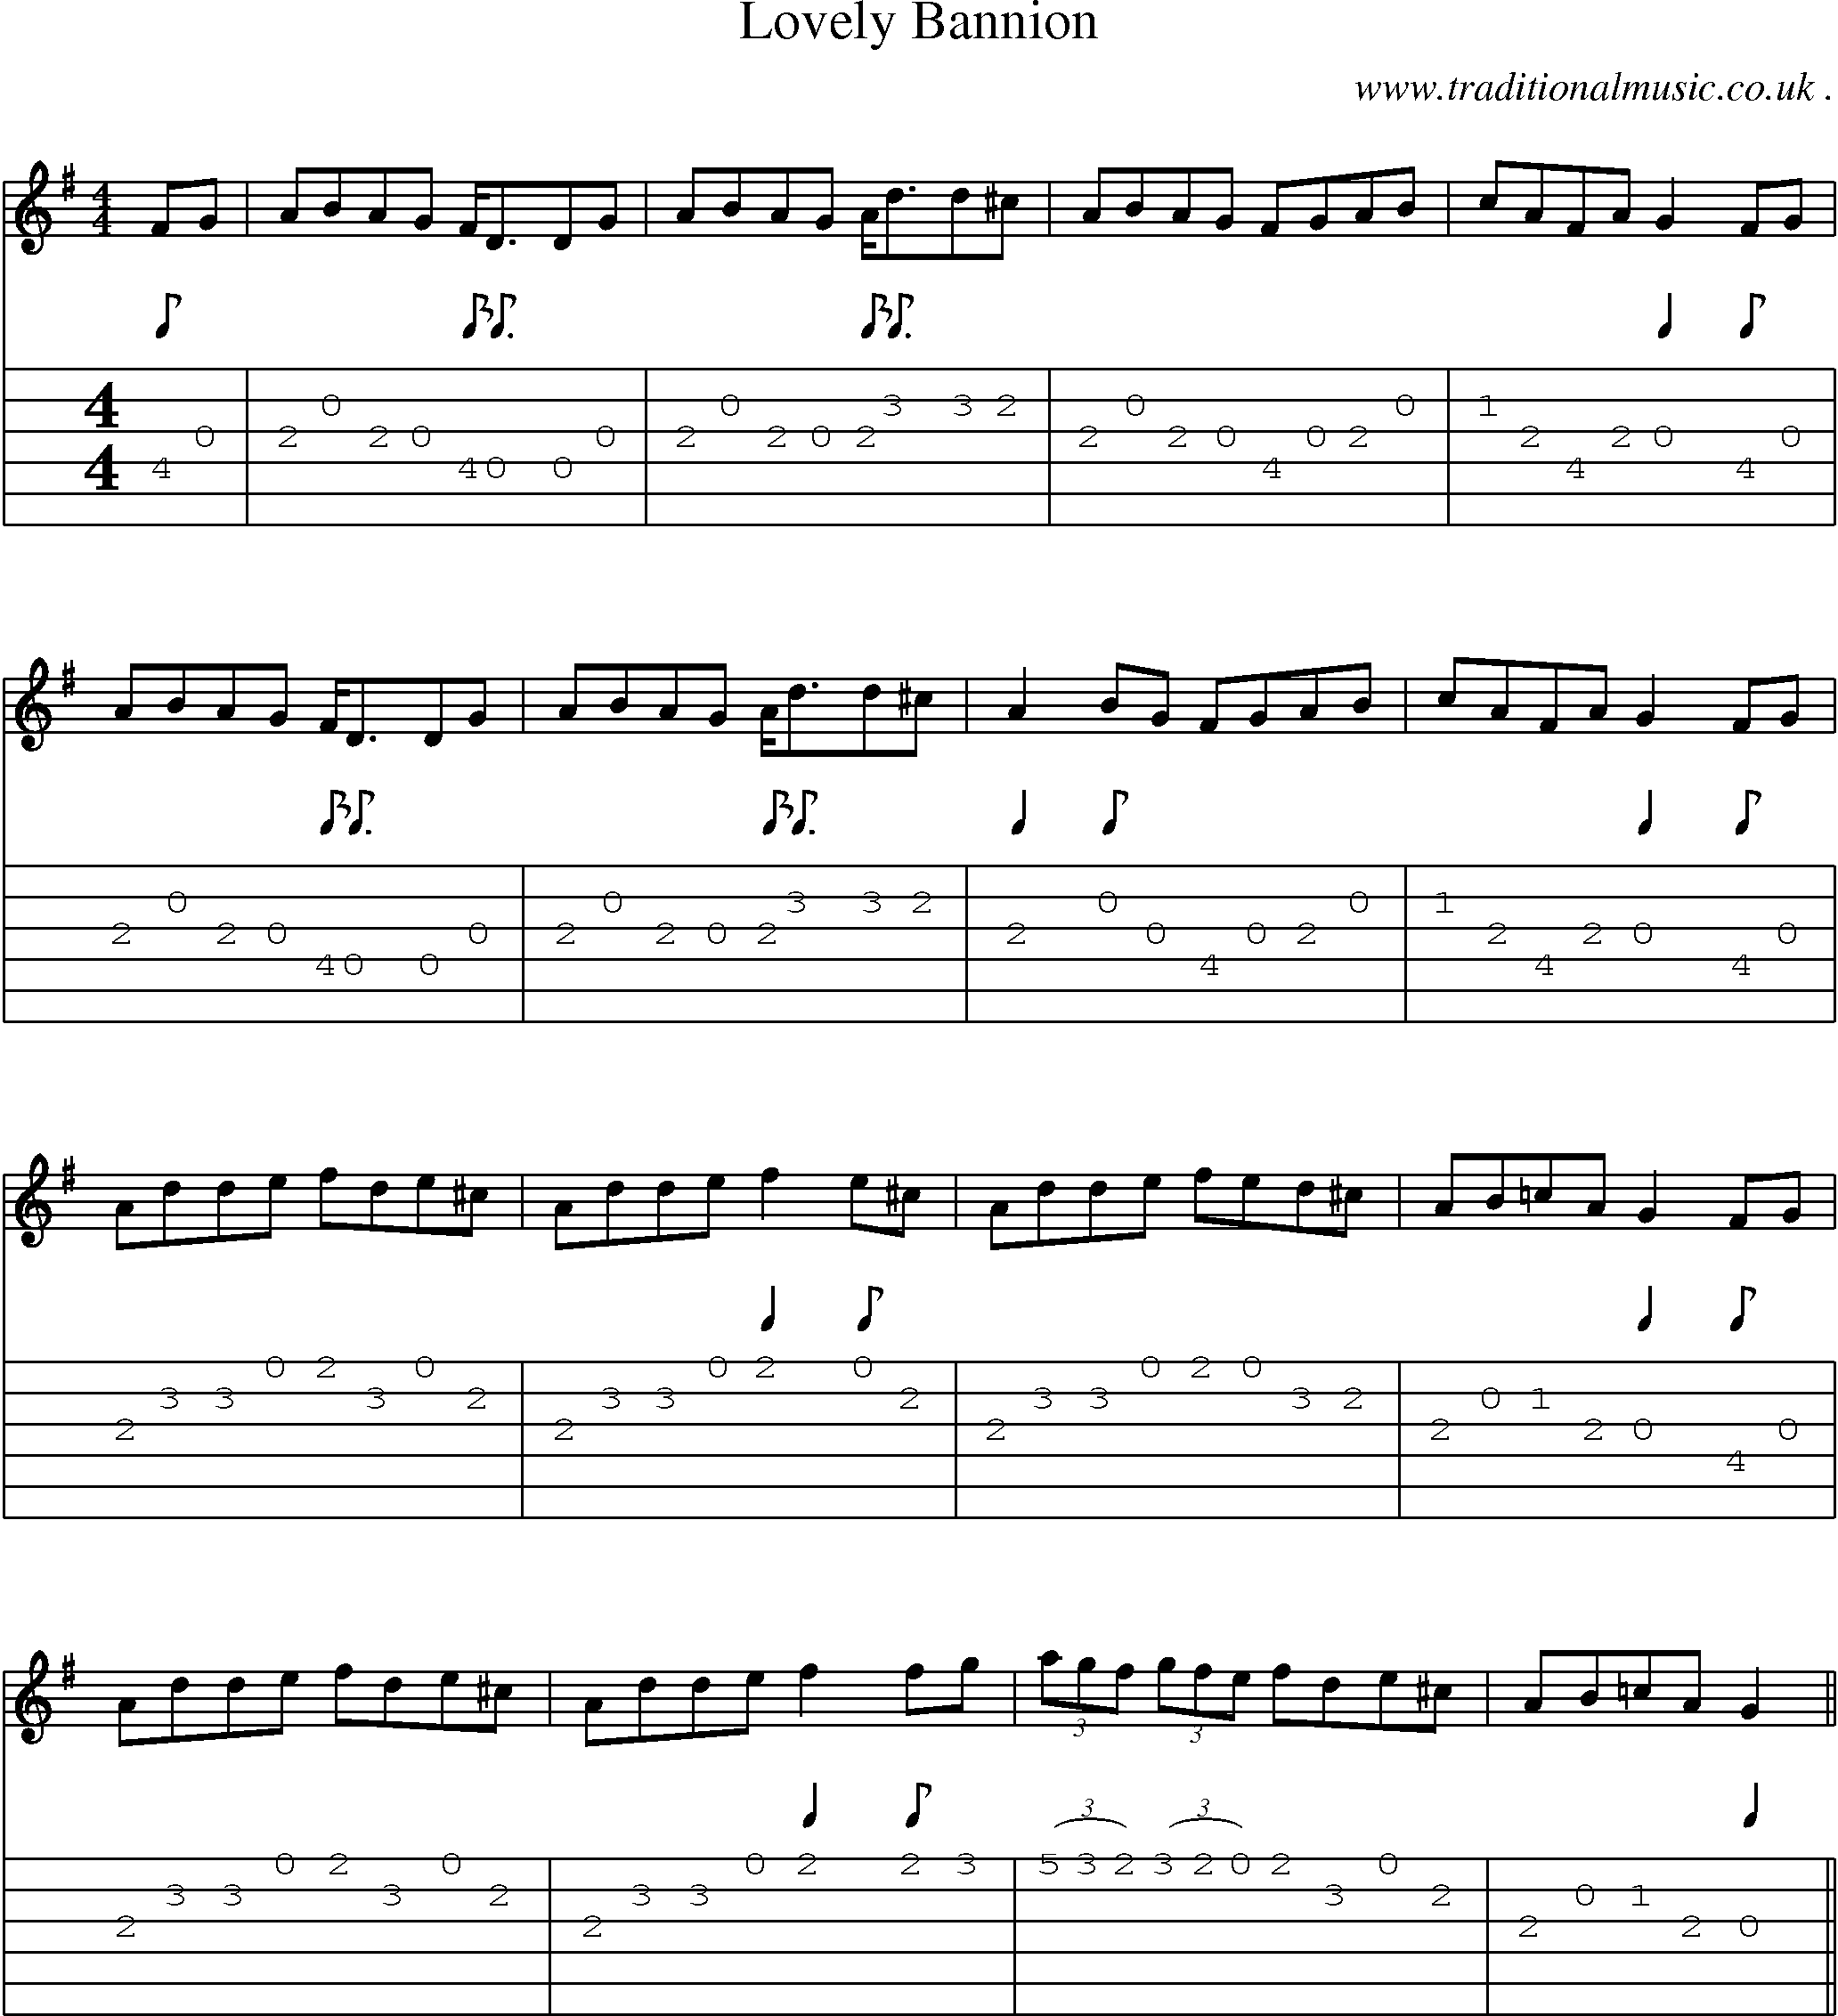 Sheet-Music and Guitar Tabs for Lovely Bannion